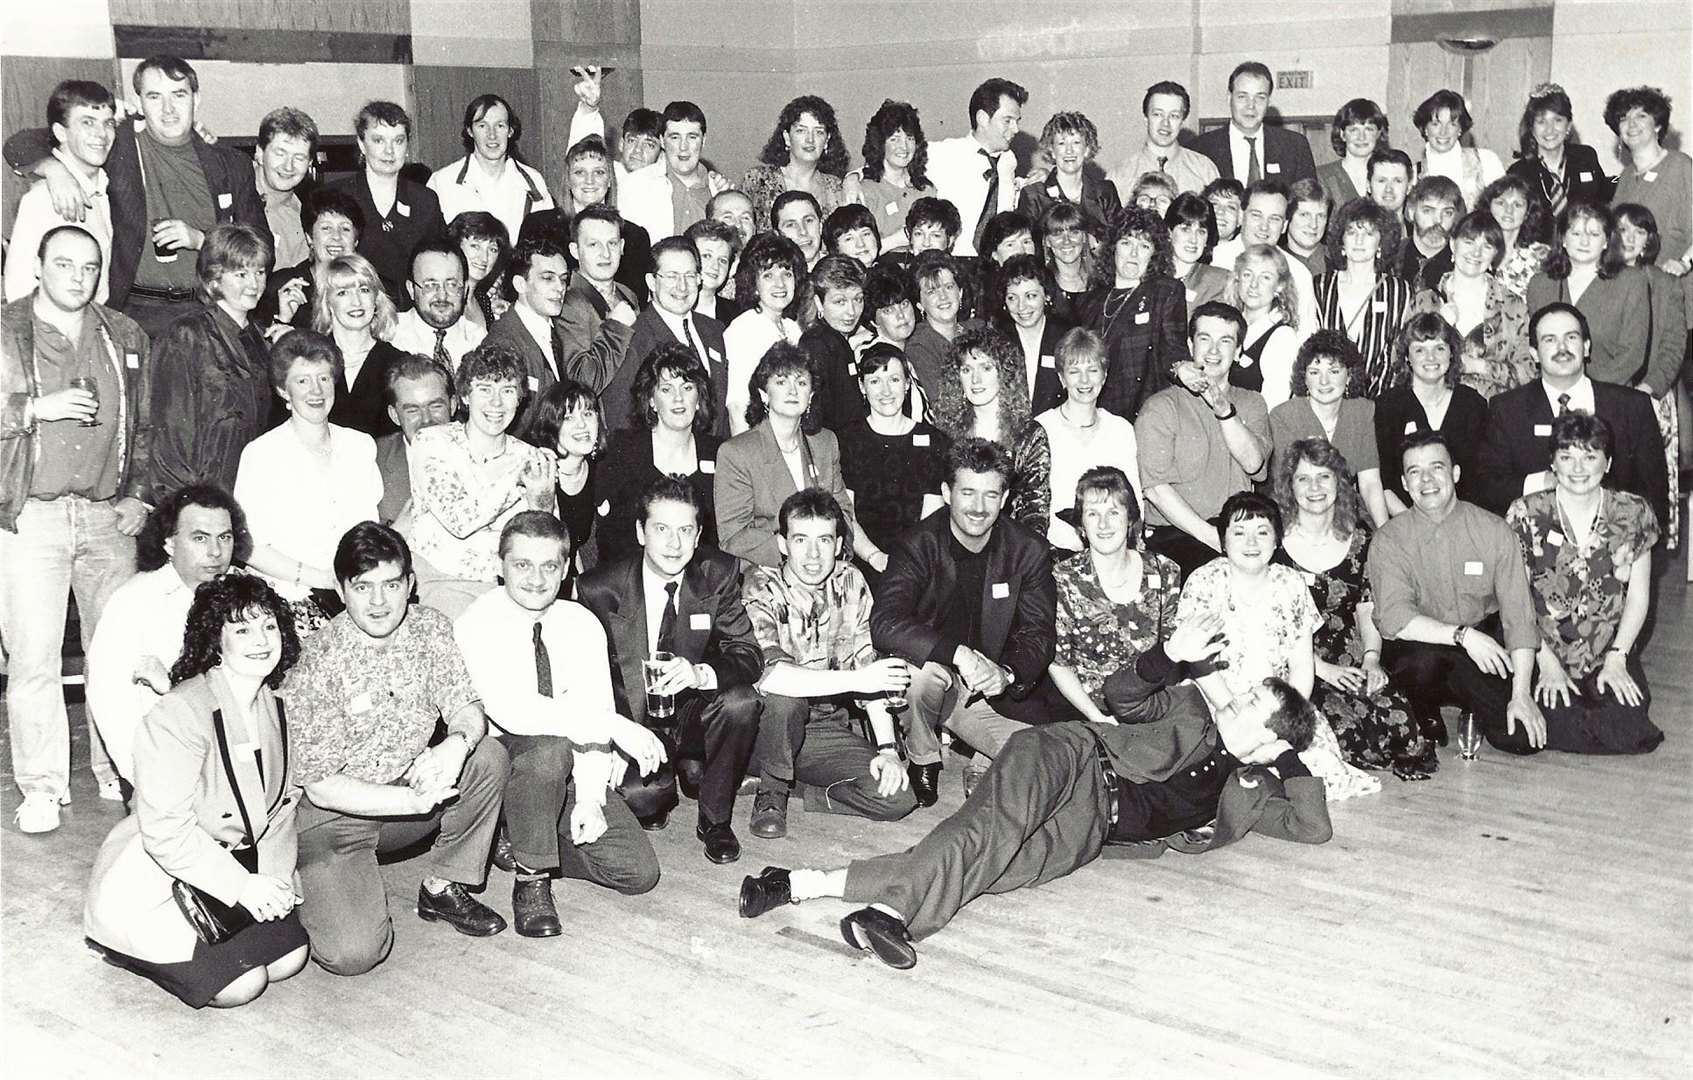 The class held their first reunion in 1993.